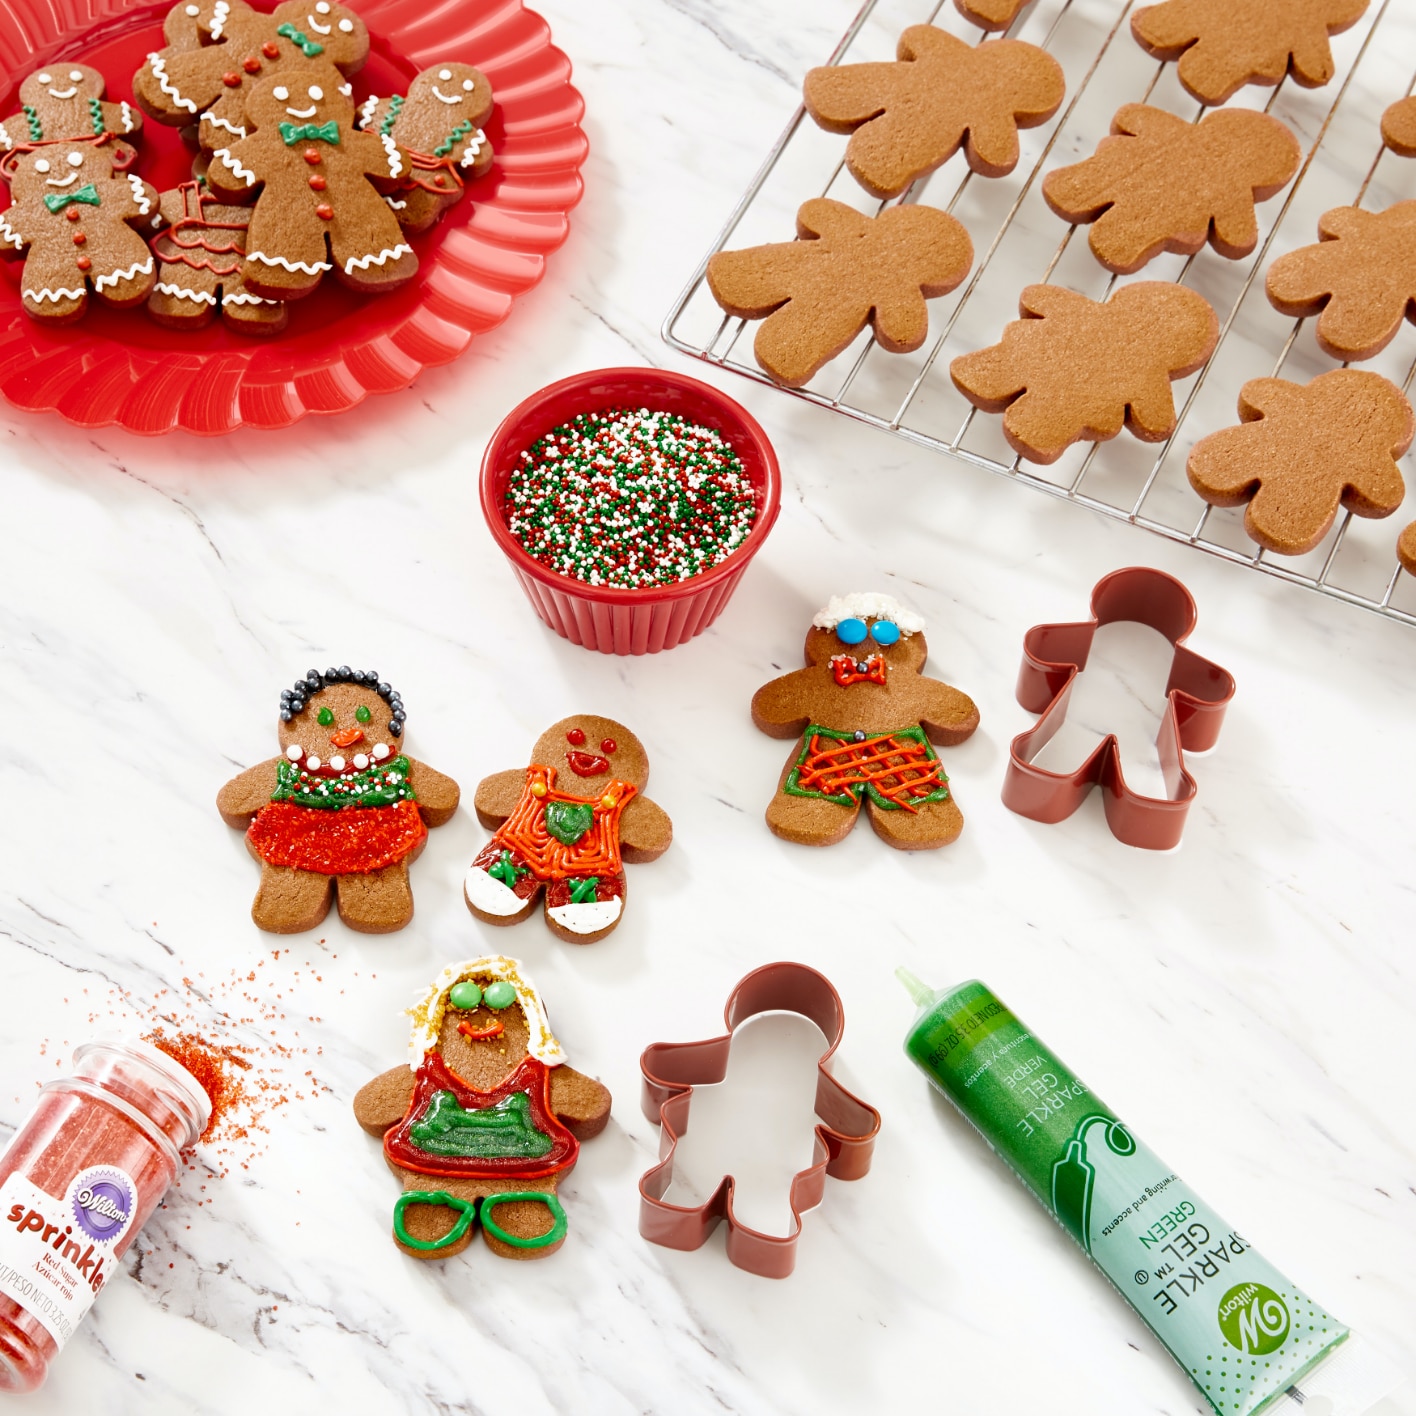 Decorated gingerbread men and other Christmas confections